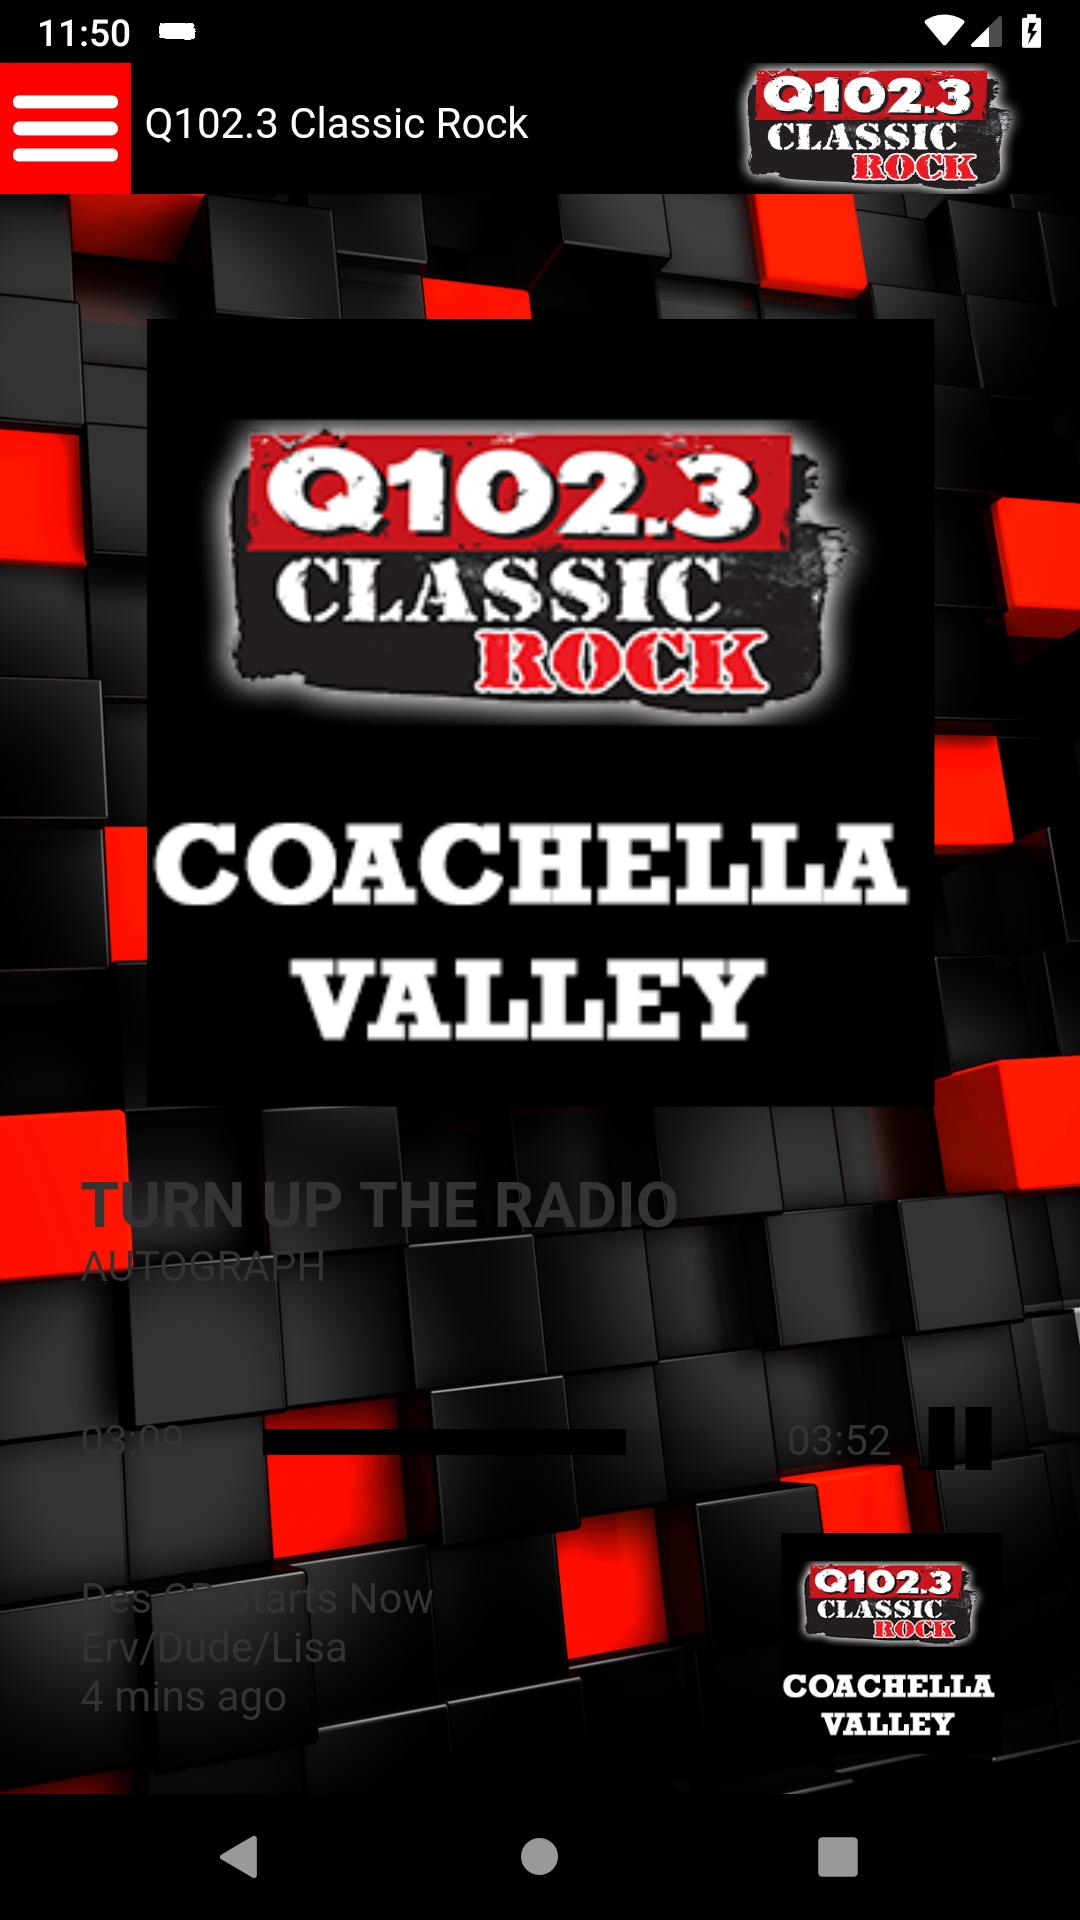 Q012.3 CLASSIC ROCK STREAM for Android - APK Download